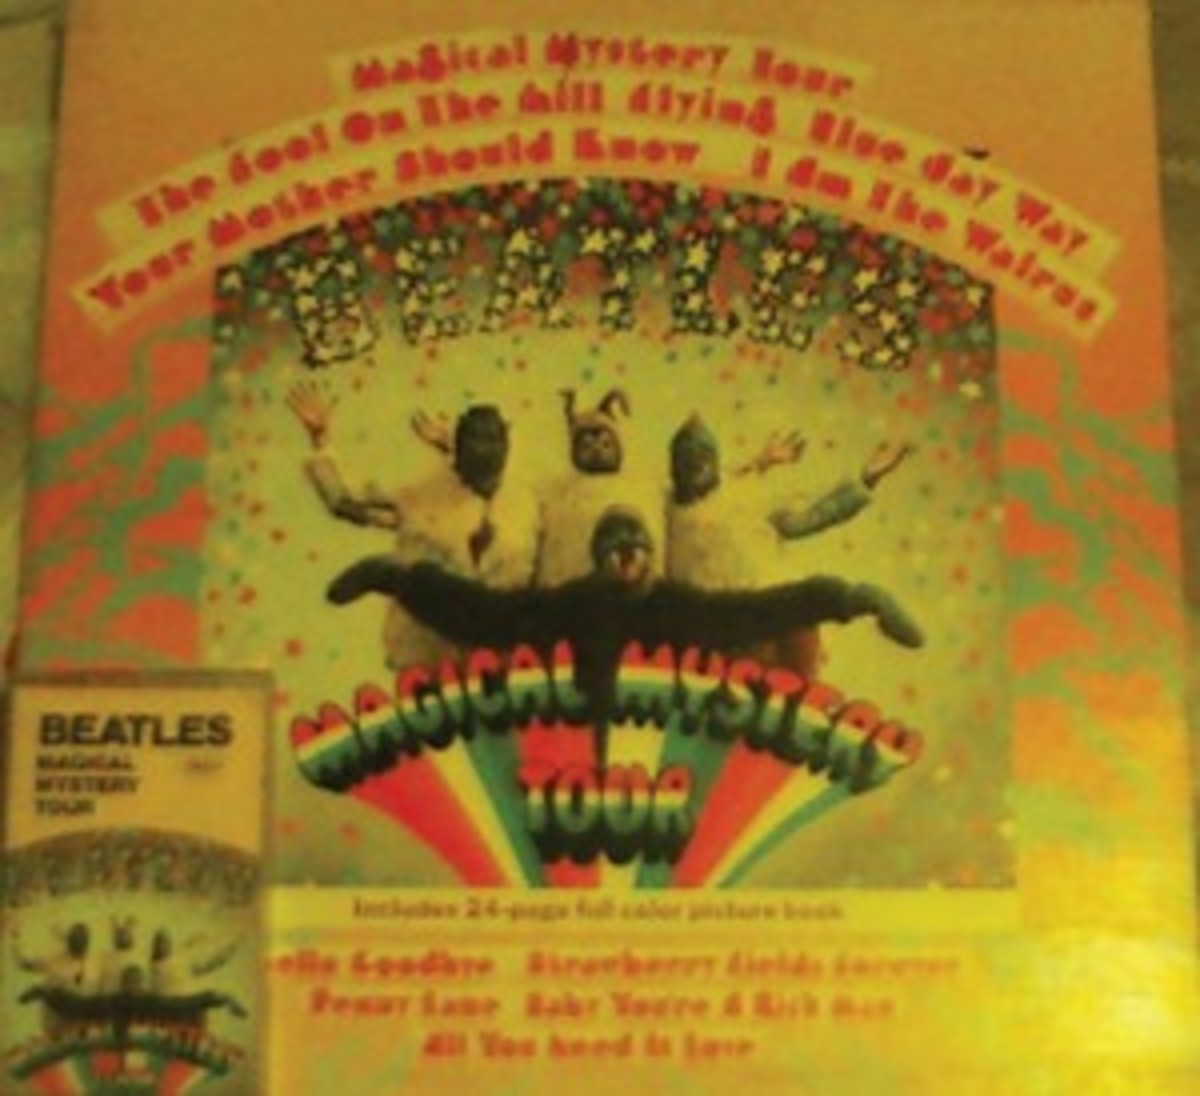 Magical Mystery Tour cover